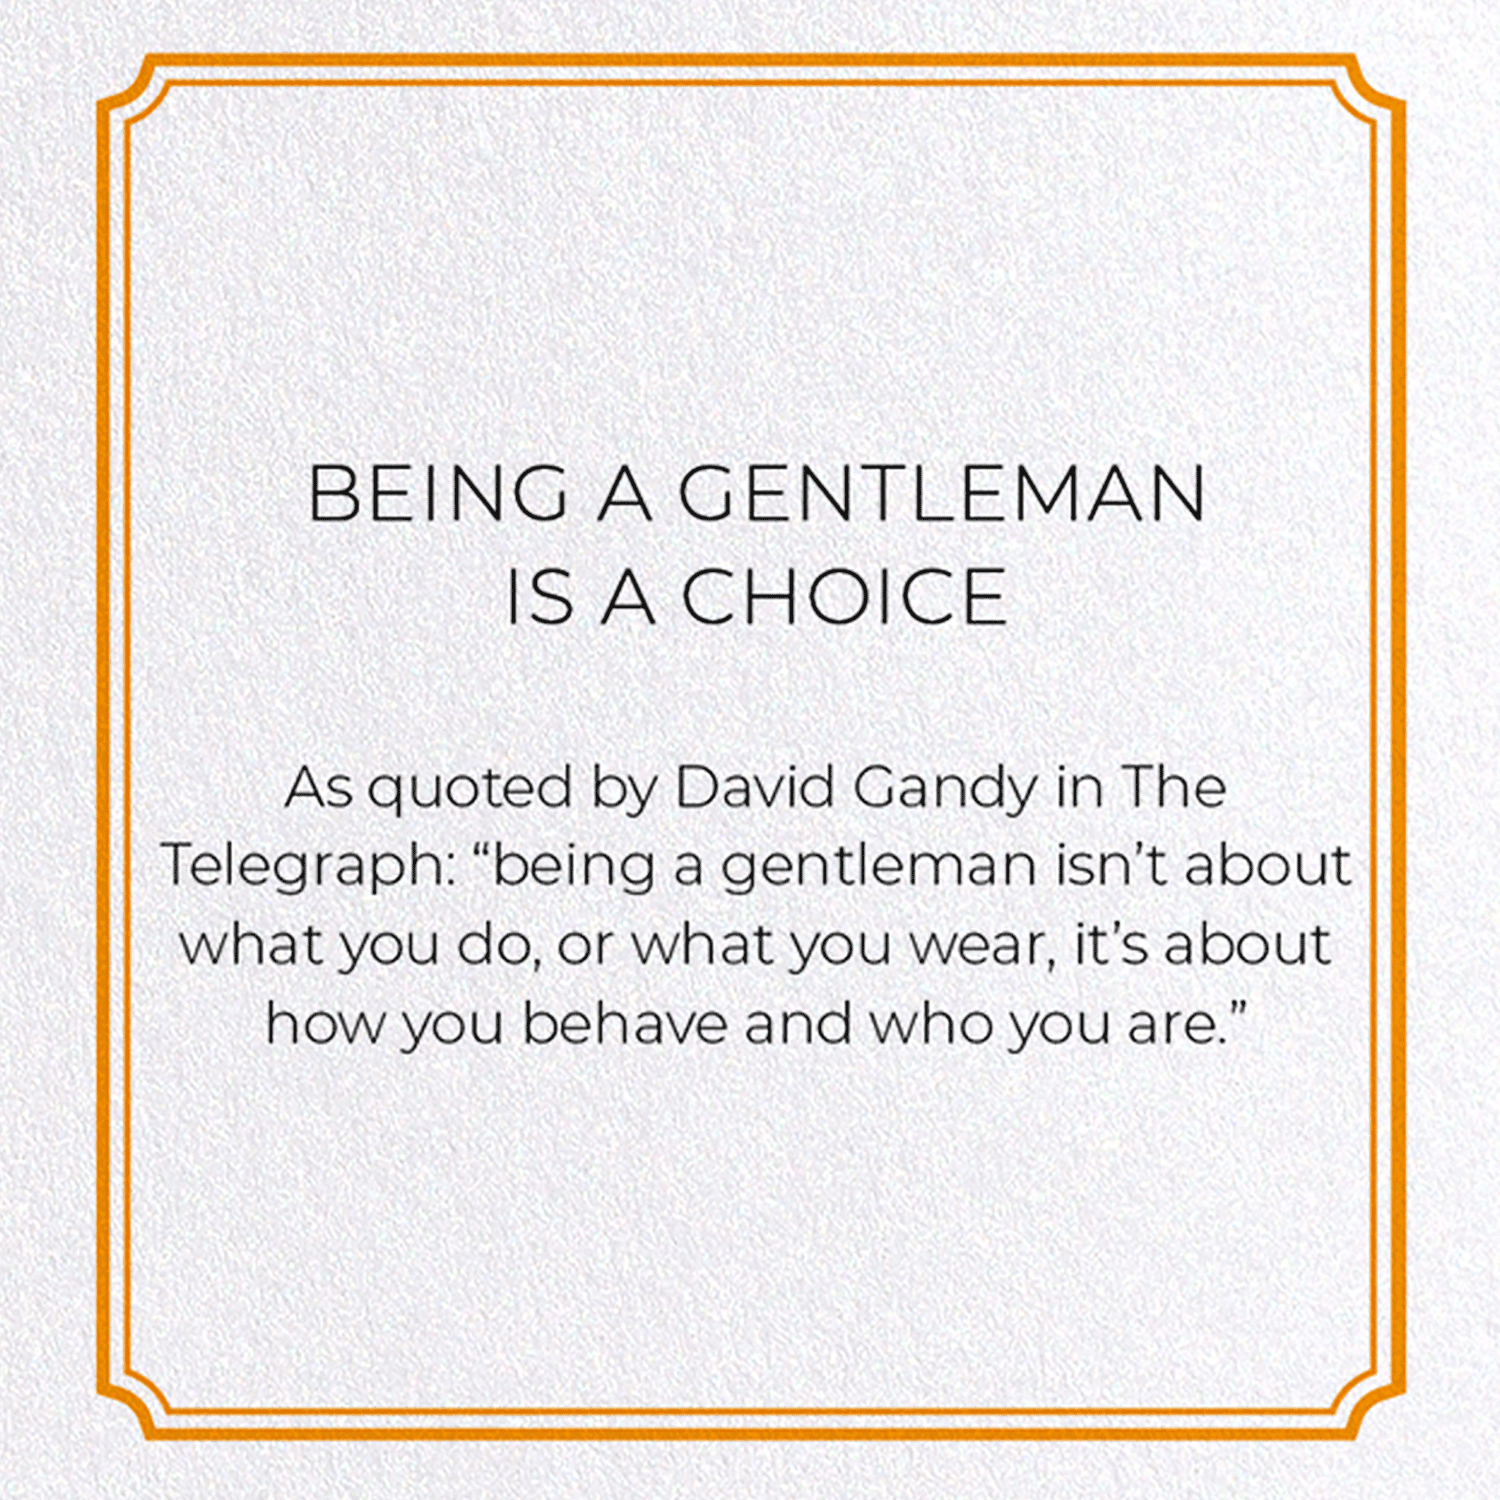 BEING A GENTLEMAN IS A CHOICE